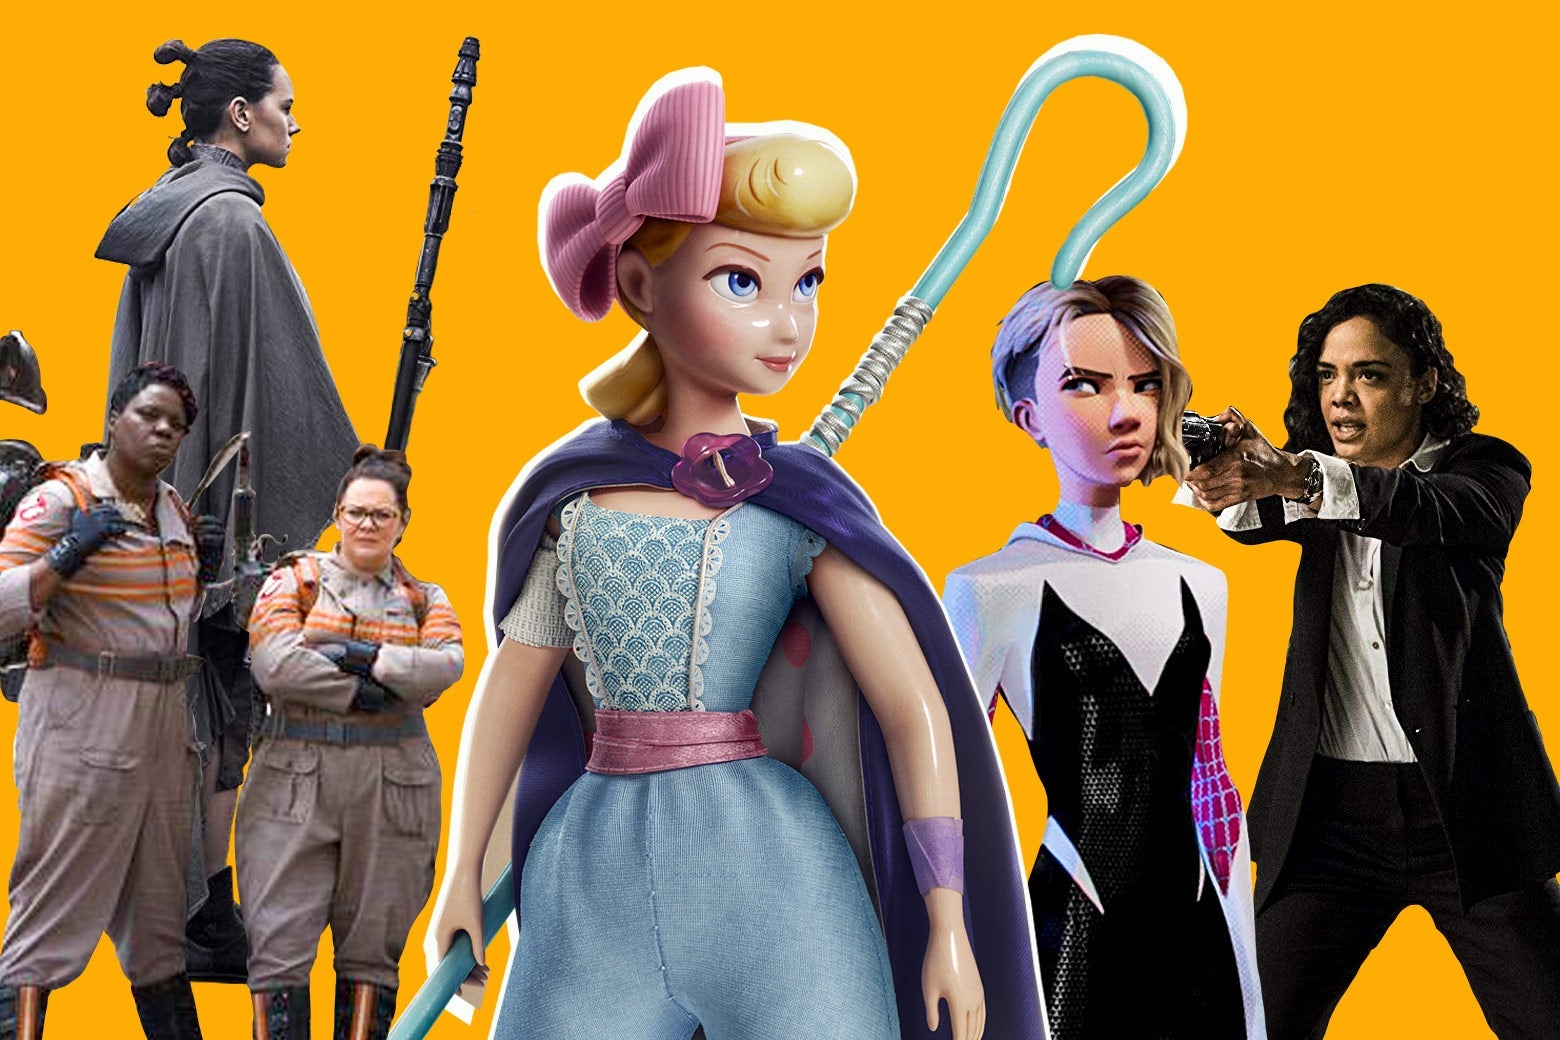 toy story 4 girl characters